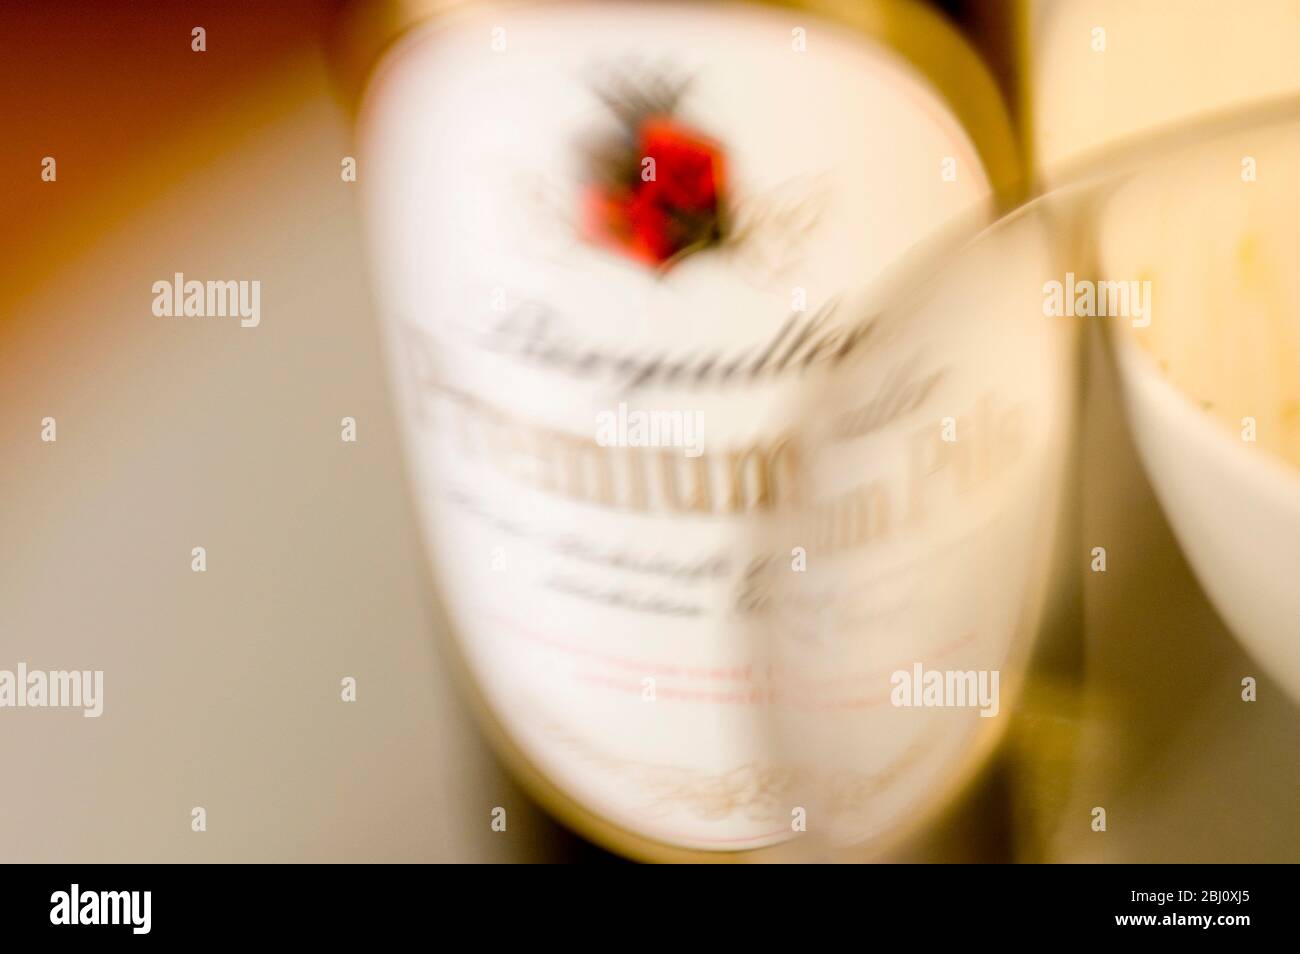 Beer bottle label and rim of glass. Shot with lensbabies lens - Stock Photo